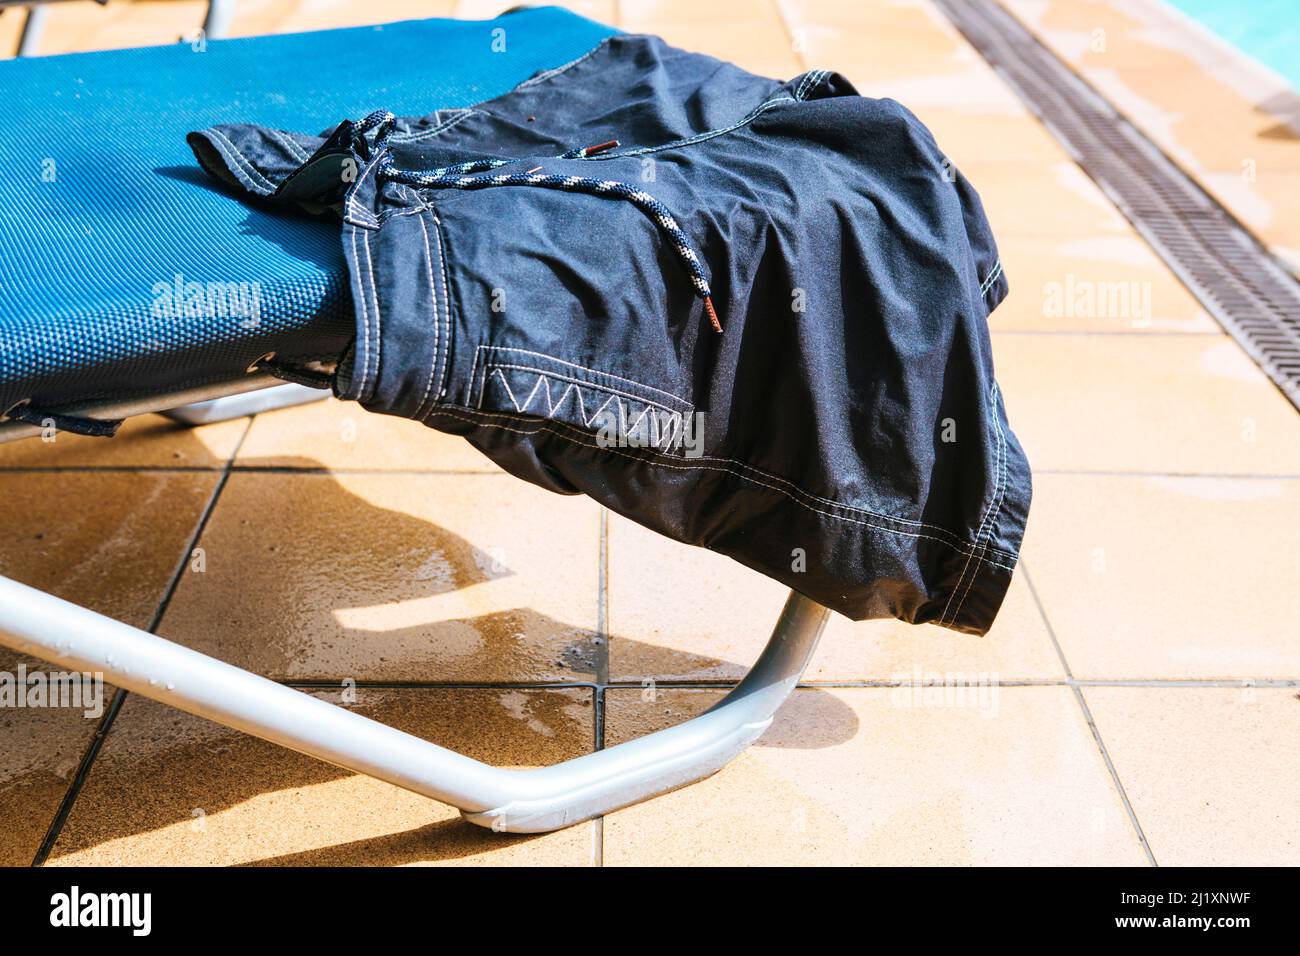 A pool side lounger with swimming costume, towels and rtrunks drying in the sun. Stock Photo